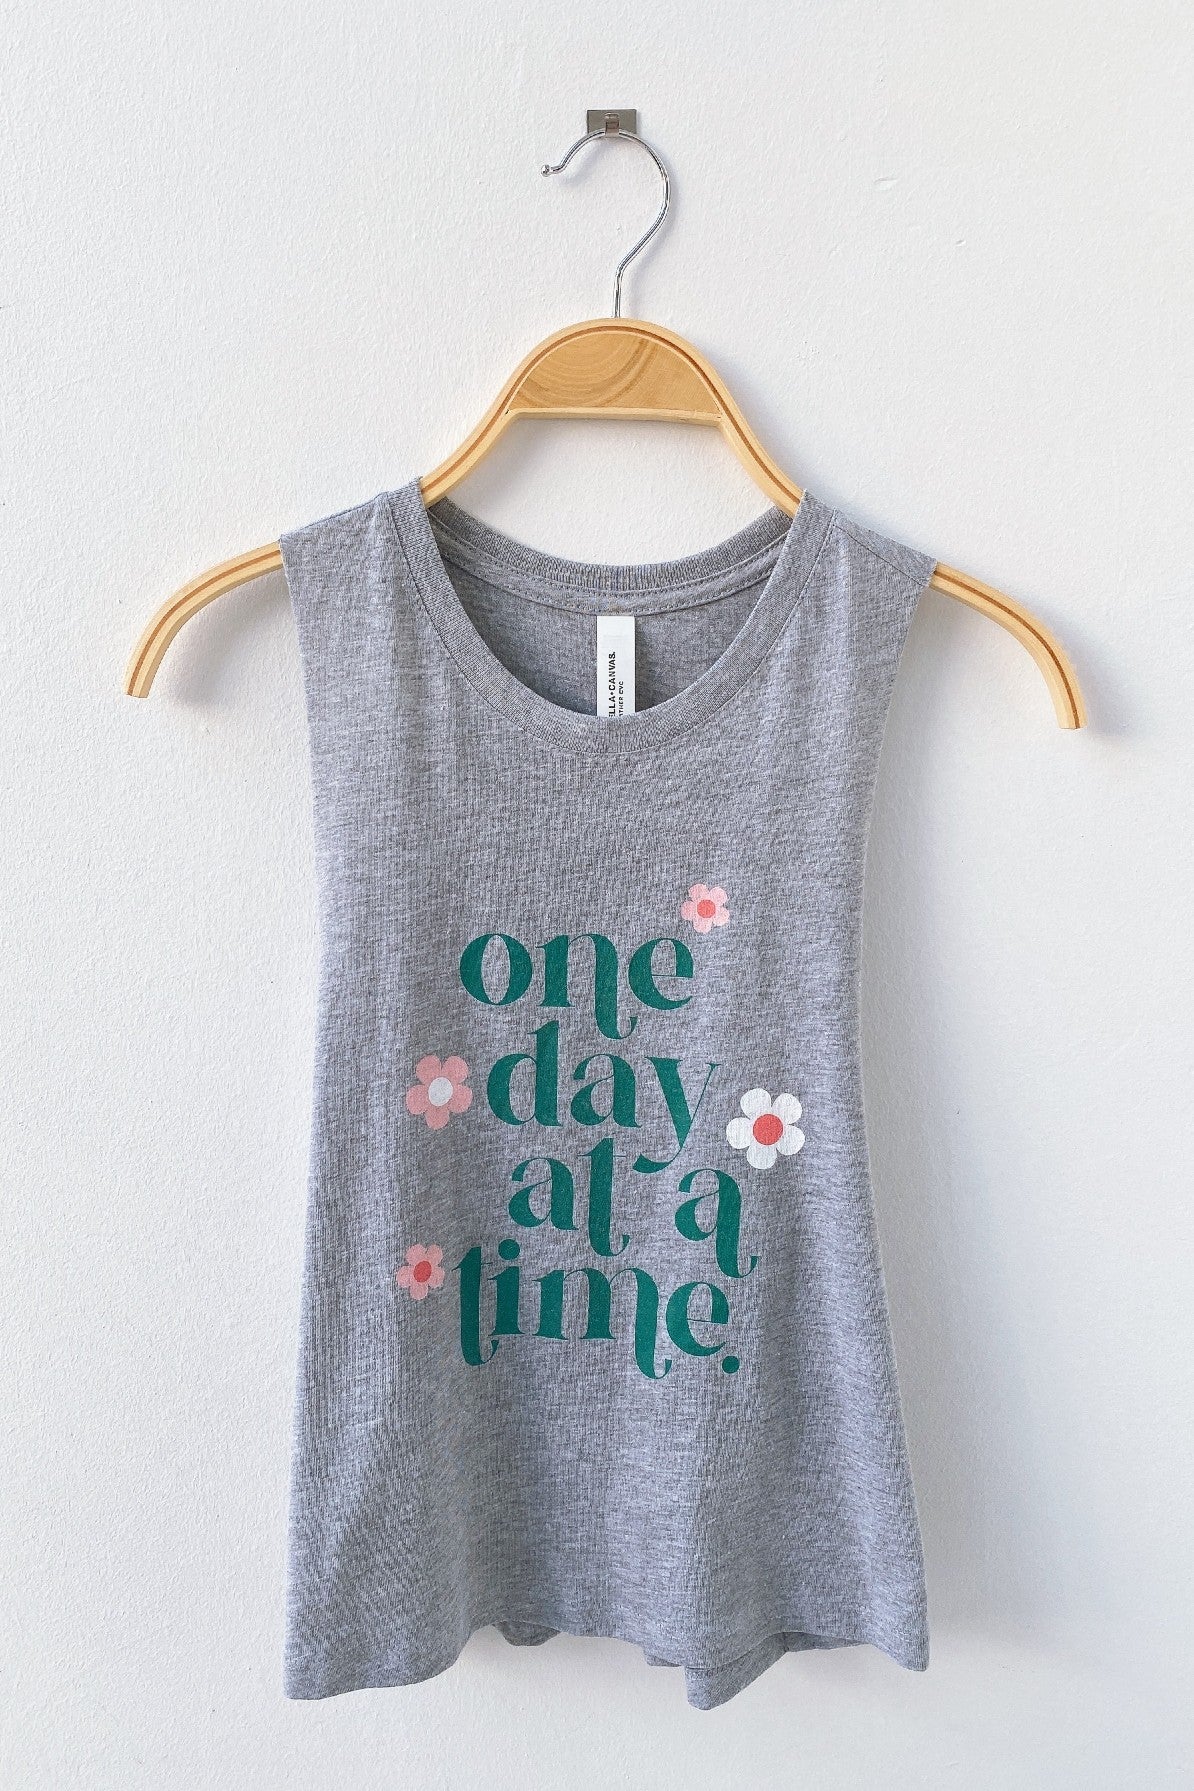 one day at a time Charisma Tank